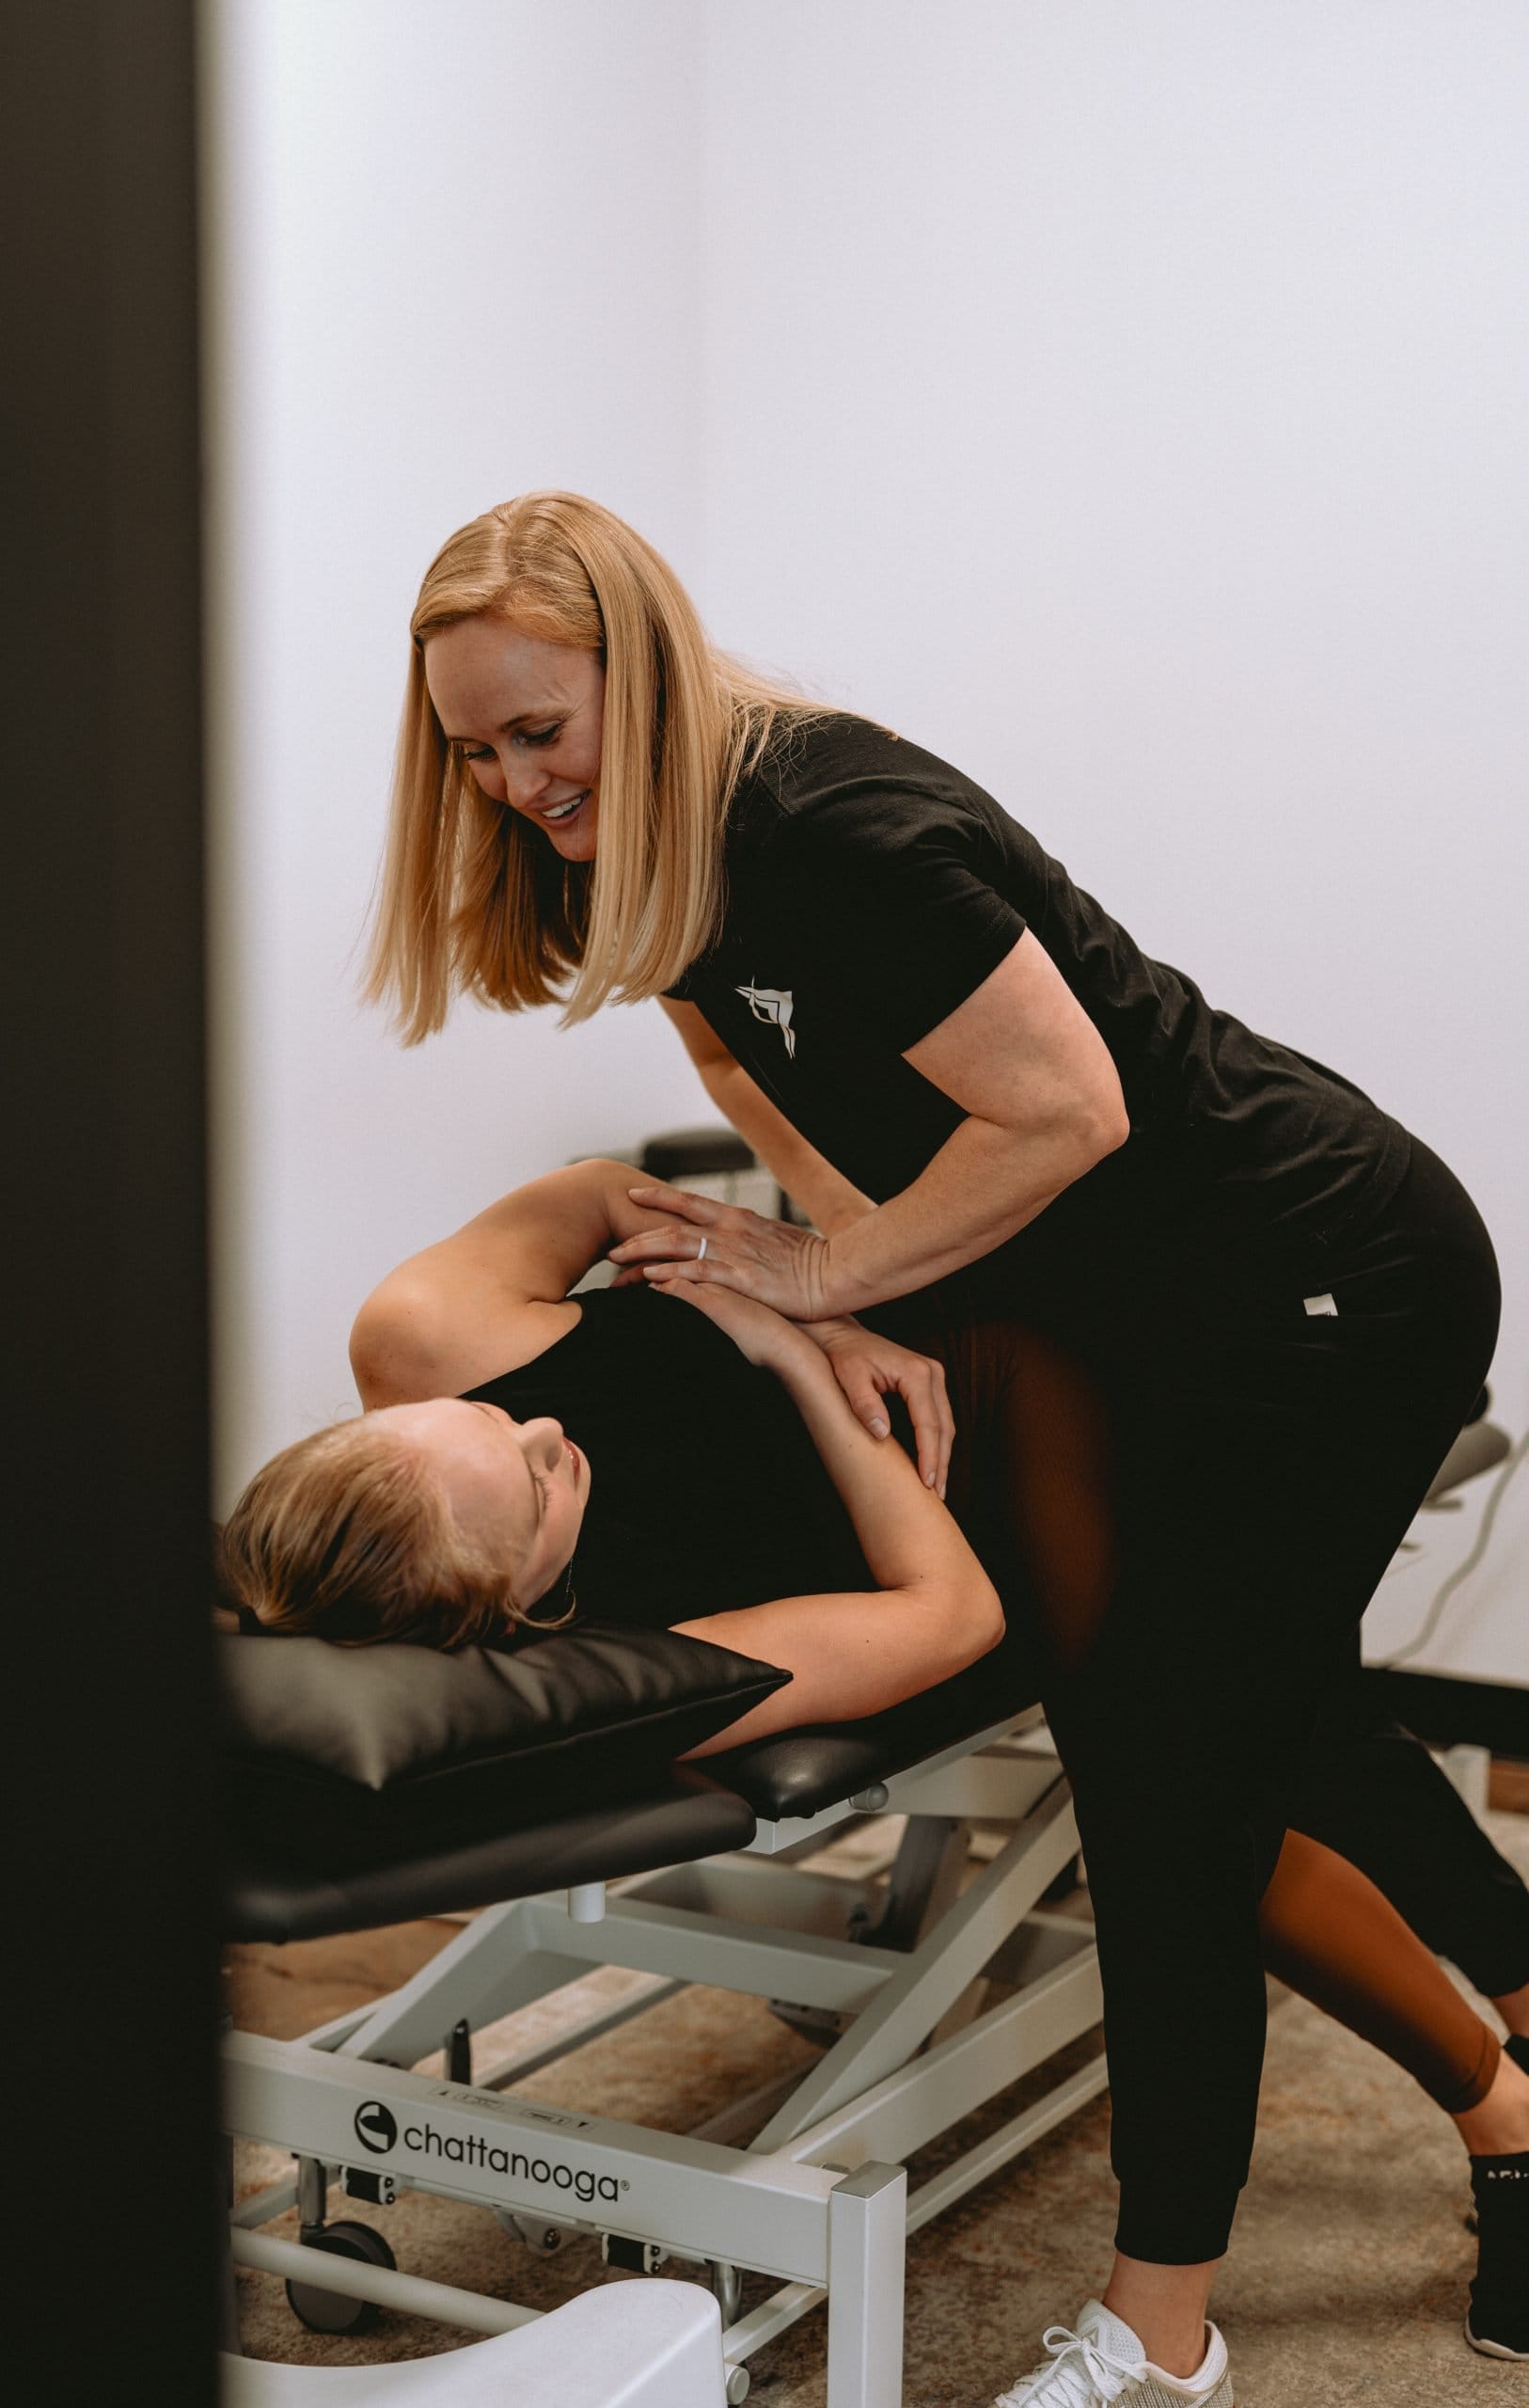 Contact | Onward Physical Therapy